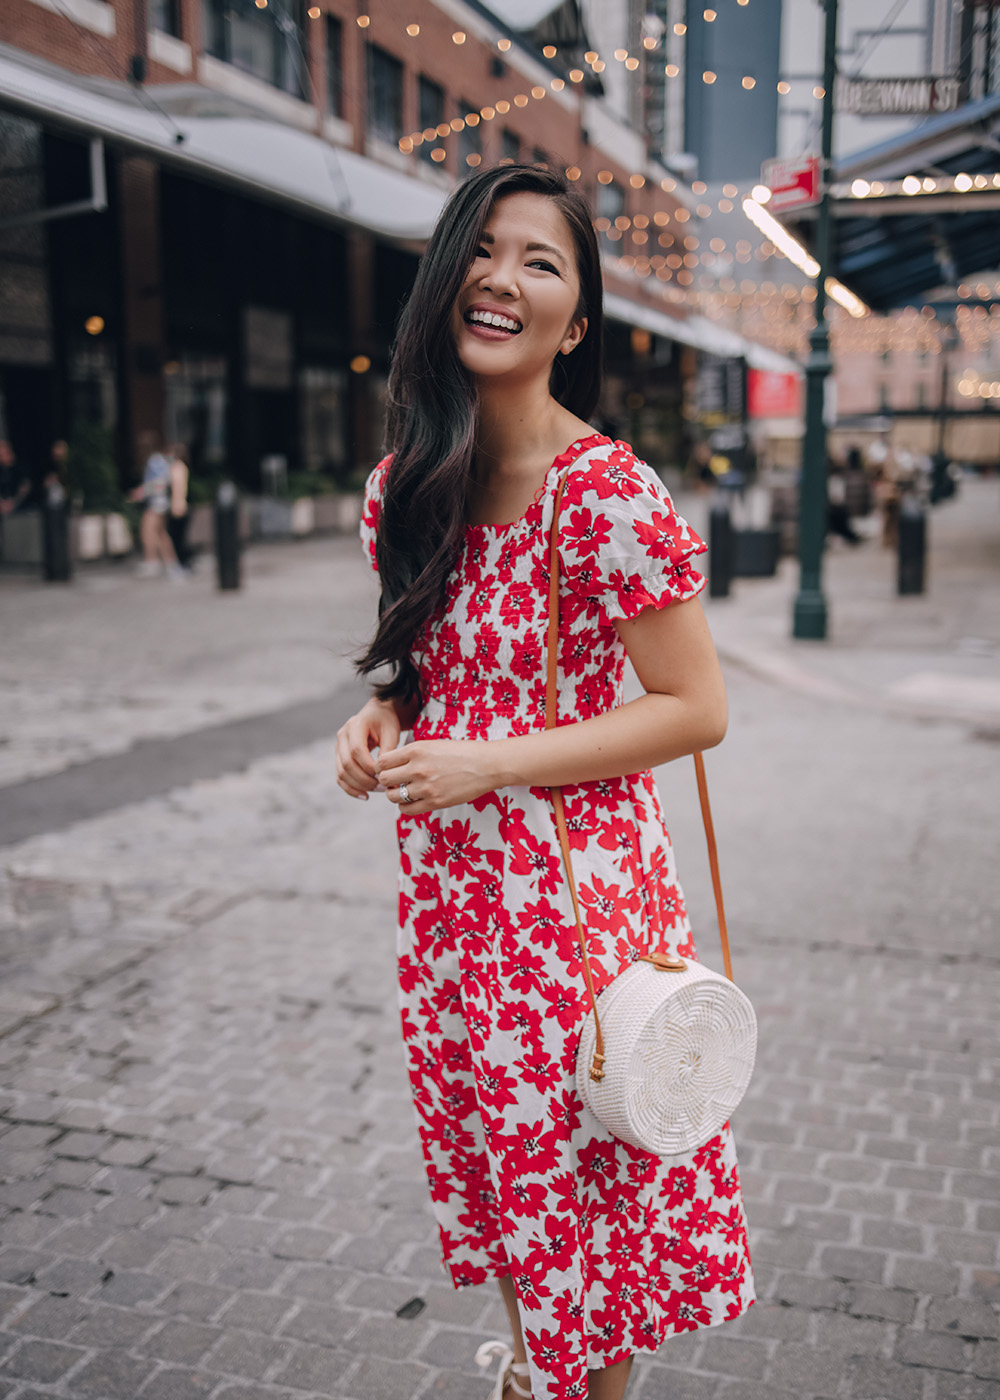 Bright Summer Outfit for Women: Red Floral Dress with Puff Sleeves